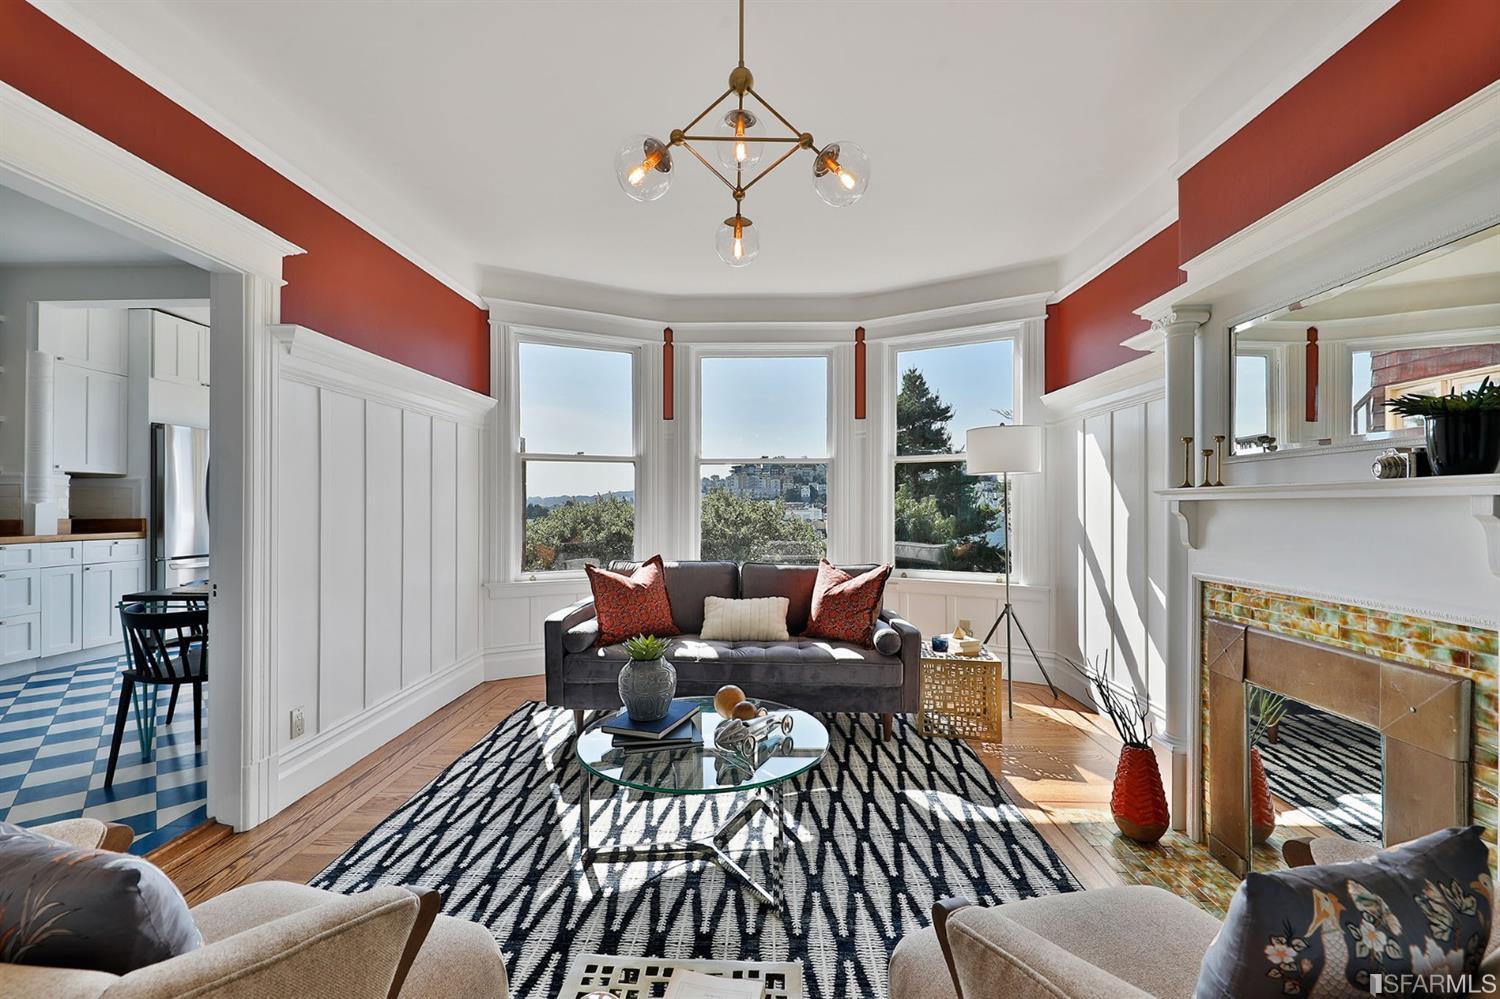 Conveniently located to enjoy Noe Valley, and nearby Dolores Park, Upper Market &amp; Duboce Park neighborhoods, restaurants, shopping and entertainment, with easy access to public transportation, corporate shuttles and freeways – 4043 23rd is a place to call home!